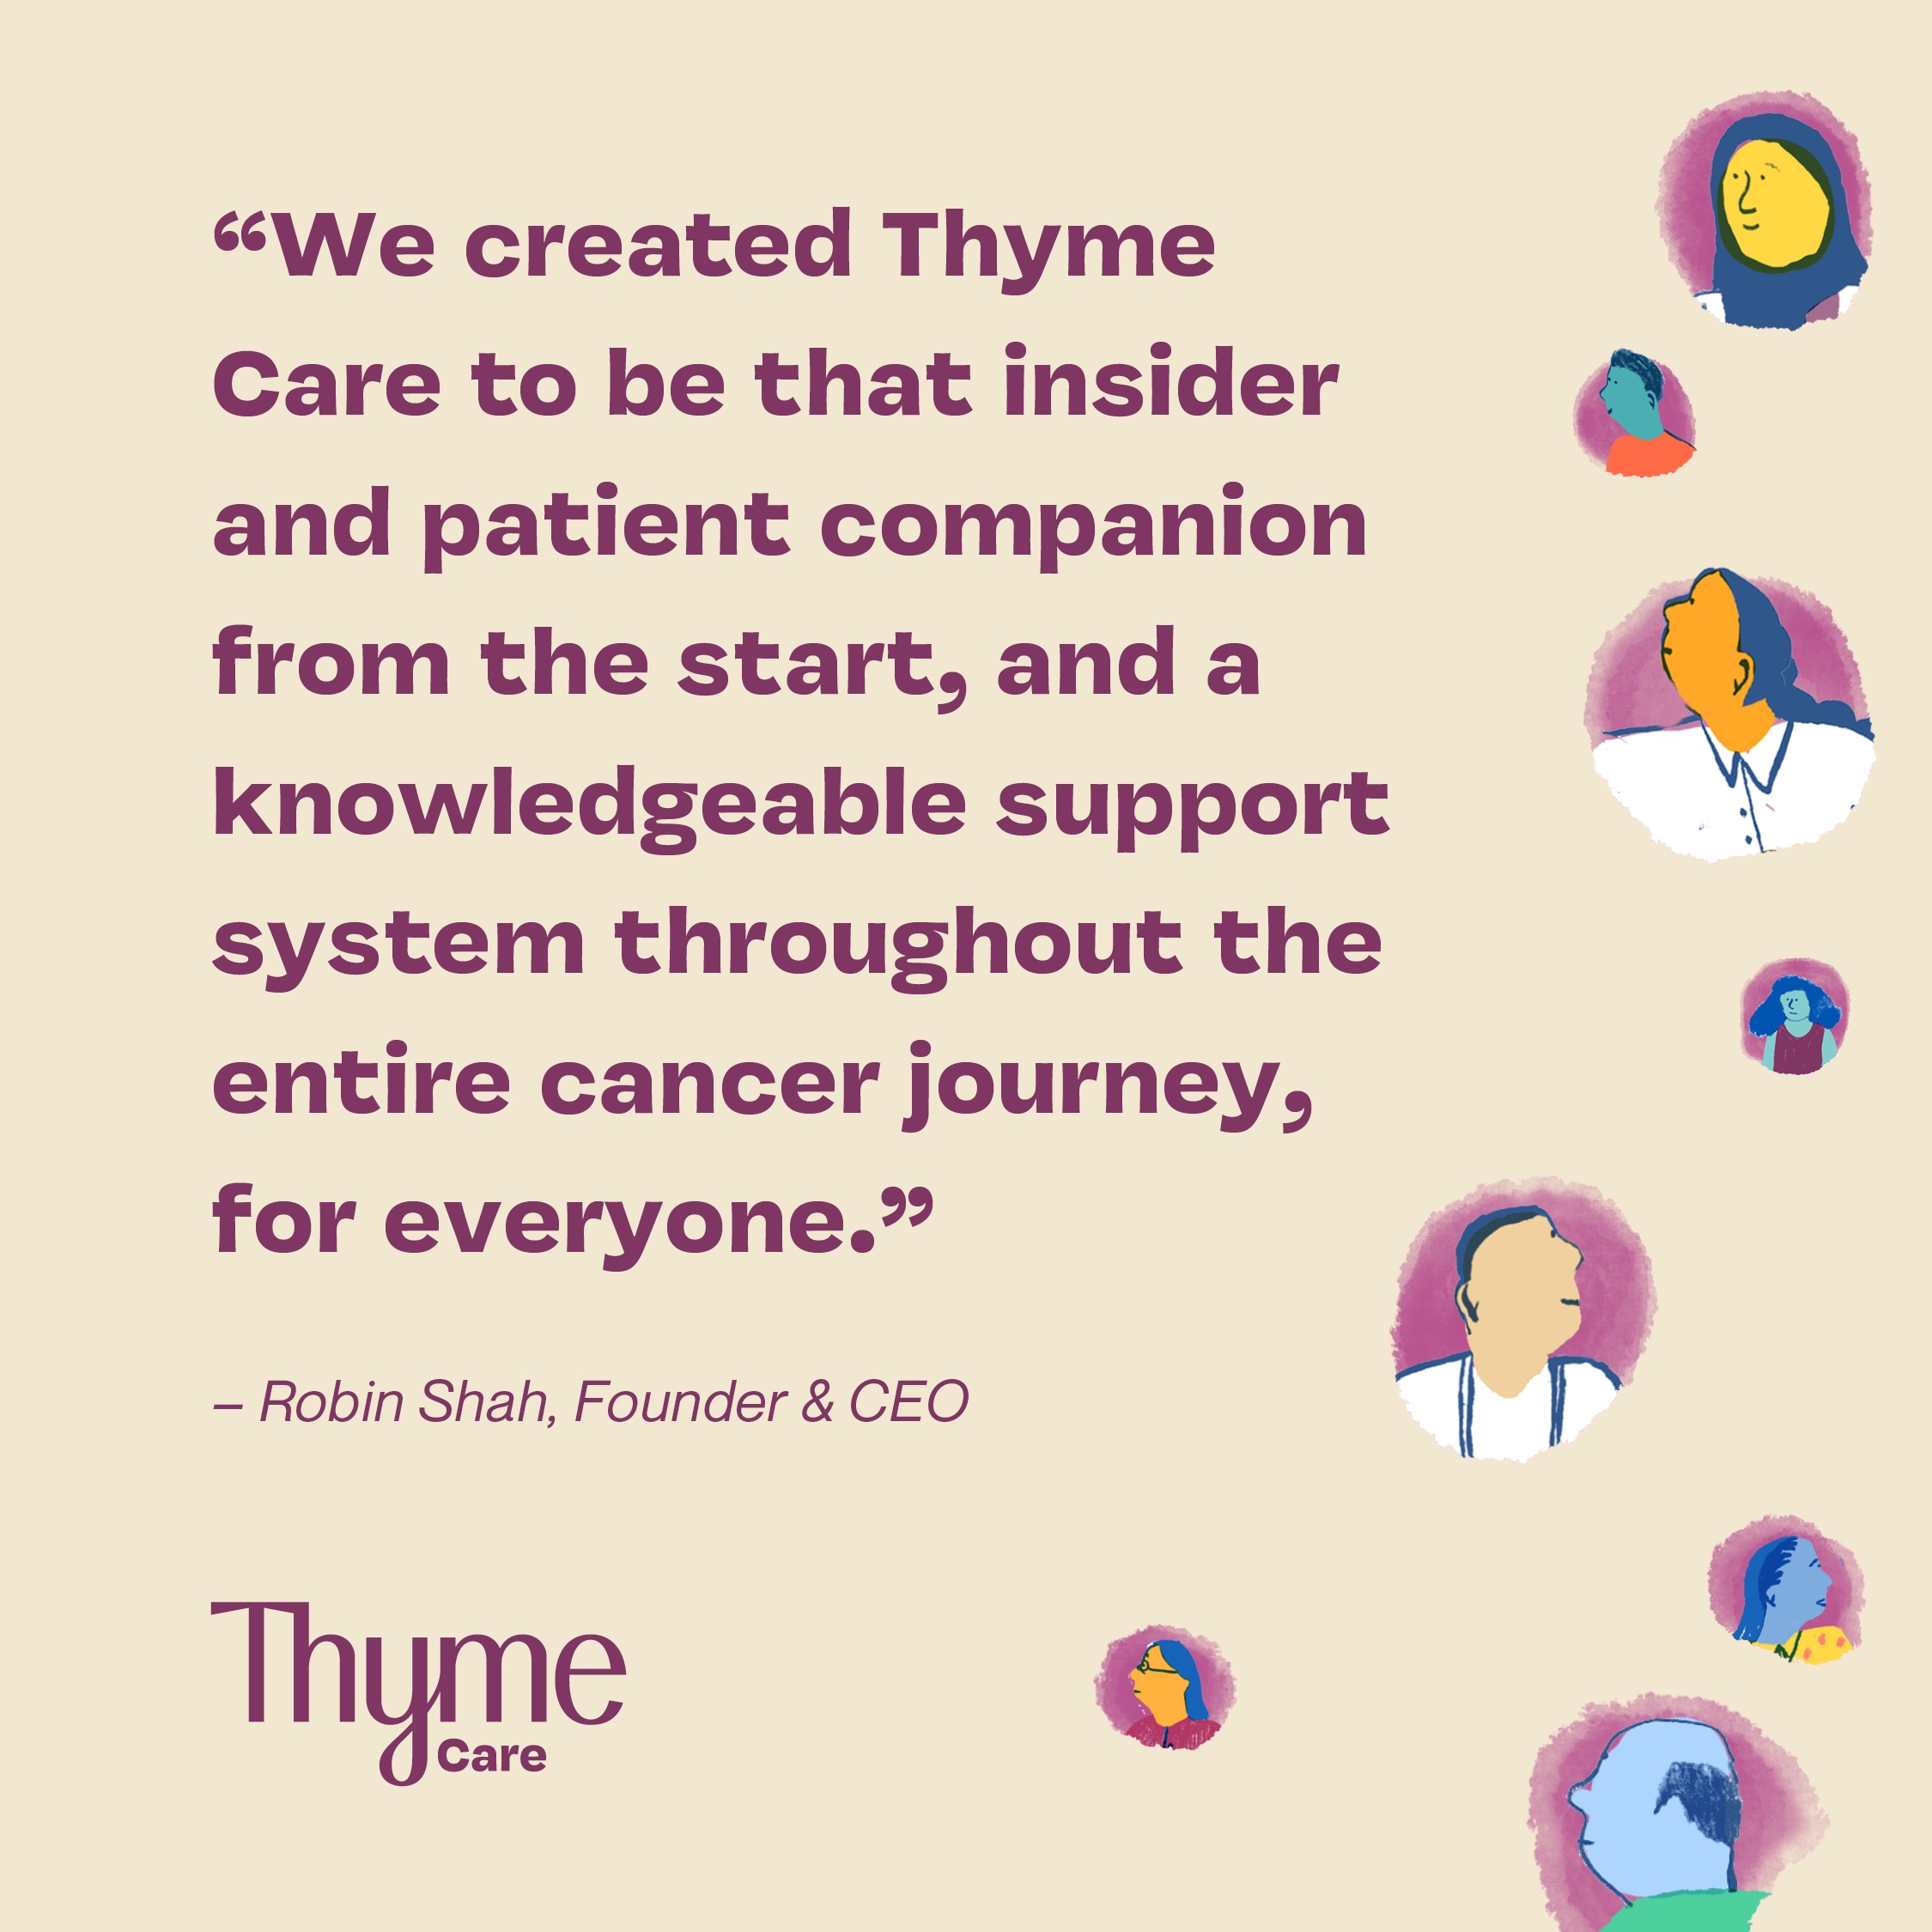 Andreessen Horowitz leads funding for Thyme Care